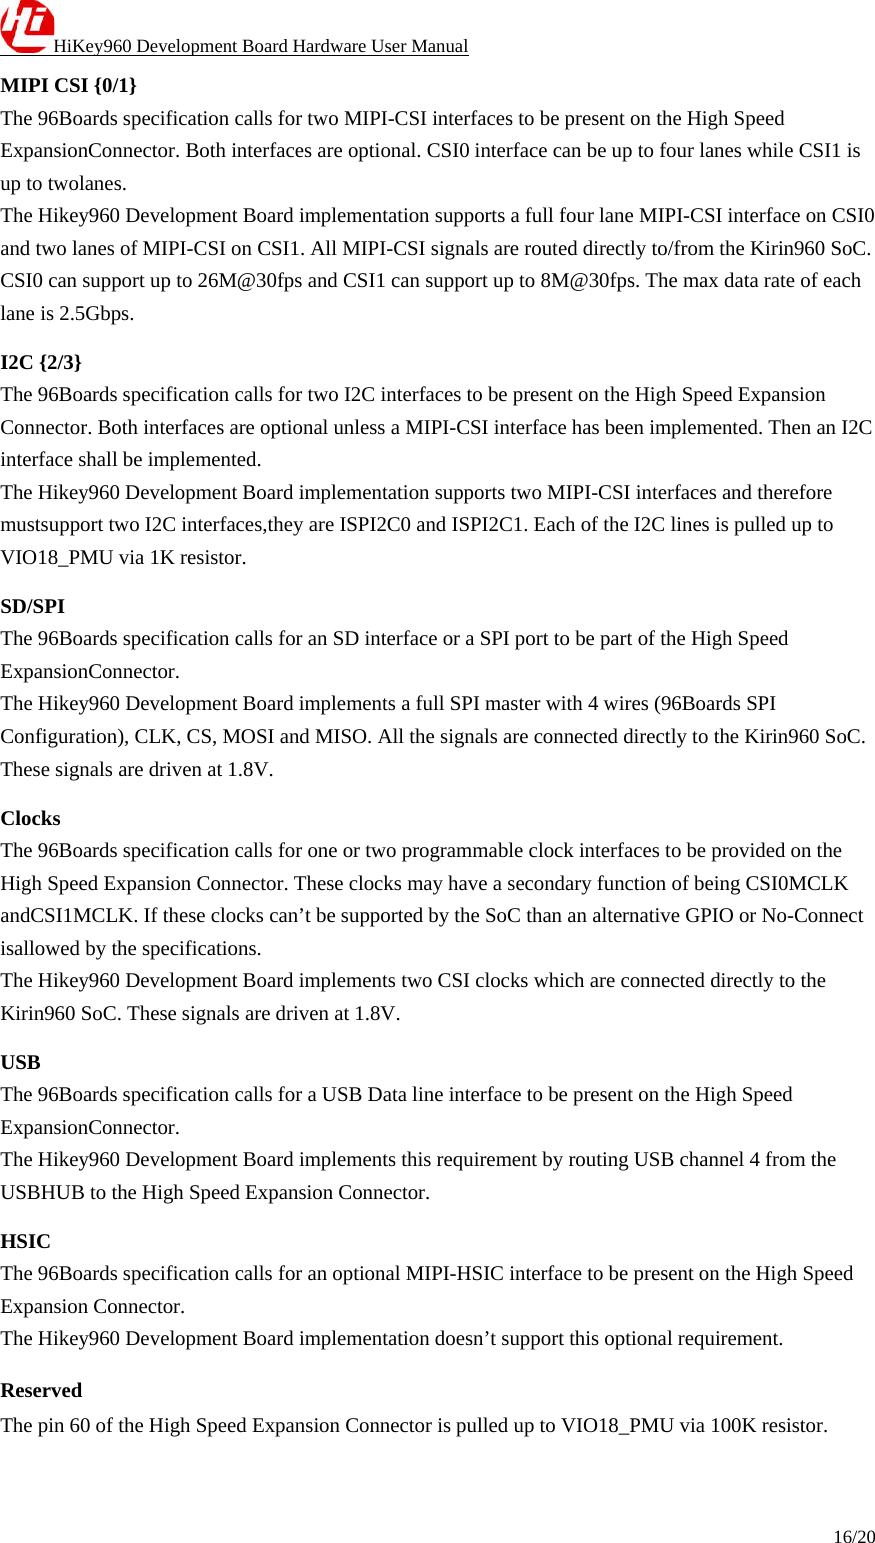 HiKey960 Development Board Hardware User Manual 16/20  MIPI CSI {0/1} The 96Boards specification calls for two MIPI-CSI interfaces to be present on the High Speed ExpansionConnector. Both interfaces are optional. CSI0 interface can be up to four lanes while CSI1 is up to twolanes. The Hikey960 Development Board implementation supports a full four lane MIPI-CSI interface on CSI0 and two lanes of MIPI-CSI on CSI1. All MIPI-CSI signals are routed directly to/from the Kirin960 SoC. CSI0 can support up to 26M@30fps and CSI1 can support up to 8M@30fps. The max data rate of each lane is 2.5Gbps. I2C {2/3} The 96Boards specification calls for two I2C interfaces to be present on the High Speed Expansion Connector. Both interfaces are optional unless a MIPI-CSI interface has been implemented. Then an I2C interface shall be implemented. The Hikey960 Development Board implementation supports two MIPI-CSI interfaces and therefore mustsupport two I2C interfaces,they are ISPI2C0 and ISPI2C1. Each of the I2C lines is pulled up to VIO18_PMU via 1K resistor. SD/SPI The 96Boards specification calls for an SD interface or a SPI port to be part of the High Speed ExpansionConnector. The Hikey960 Development Board implements a full SPI master with 4 wires (96Boards SPI Configuration), CLK, CS, MOSI and MISO. All the signals are connected directly to the Kirin960 SoC. These signals are driven at 1.8V. Clocks The 96Boards specification calls for one or two programmable clock interfaces to be provided on the High Speed Expansion Connector. These clocks may have a secondary function of being CSI0MCLK andCSI1MCLK. If these clocks can’t be supported by the SoC than an alternative GPIO or No-Connect isallowed by the specifications. The Hikey960 Development Board implements two CSI clocks which are connected directly to the Kirin960 SoC. These signals are driven at 1.8V. USB The 96Boards specification calls for a USB Data line interface to be present on the High Speed ExpansionConnector. The Hikey960 Development Board implements this requirement by routing USB channel 4 from the USBHUB to the High Speed Expansion Connector. HSIC The 96Boards specification calls for an optional MIPI-HSIC interface to be present on the High Speed Expansion Connector. The Hikey960 Development Board implementation doesn’t support this optional requirement. Reserved The pin 60 of the High Speed Expansion Connector is pulled up to VIO18_PMU via 100K resistor. 